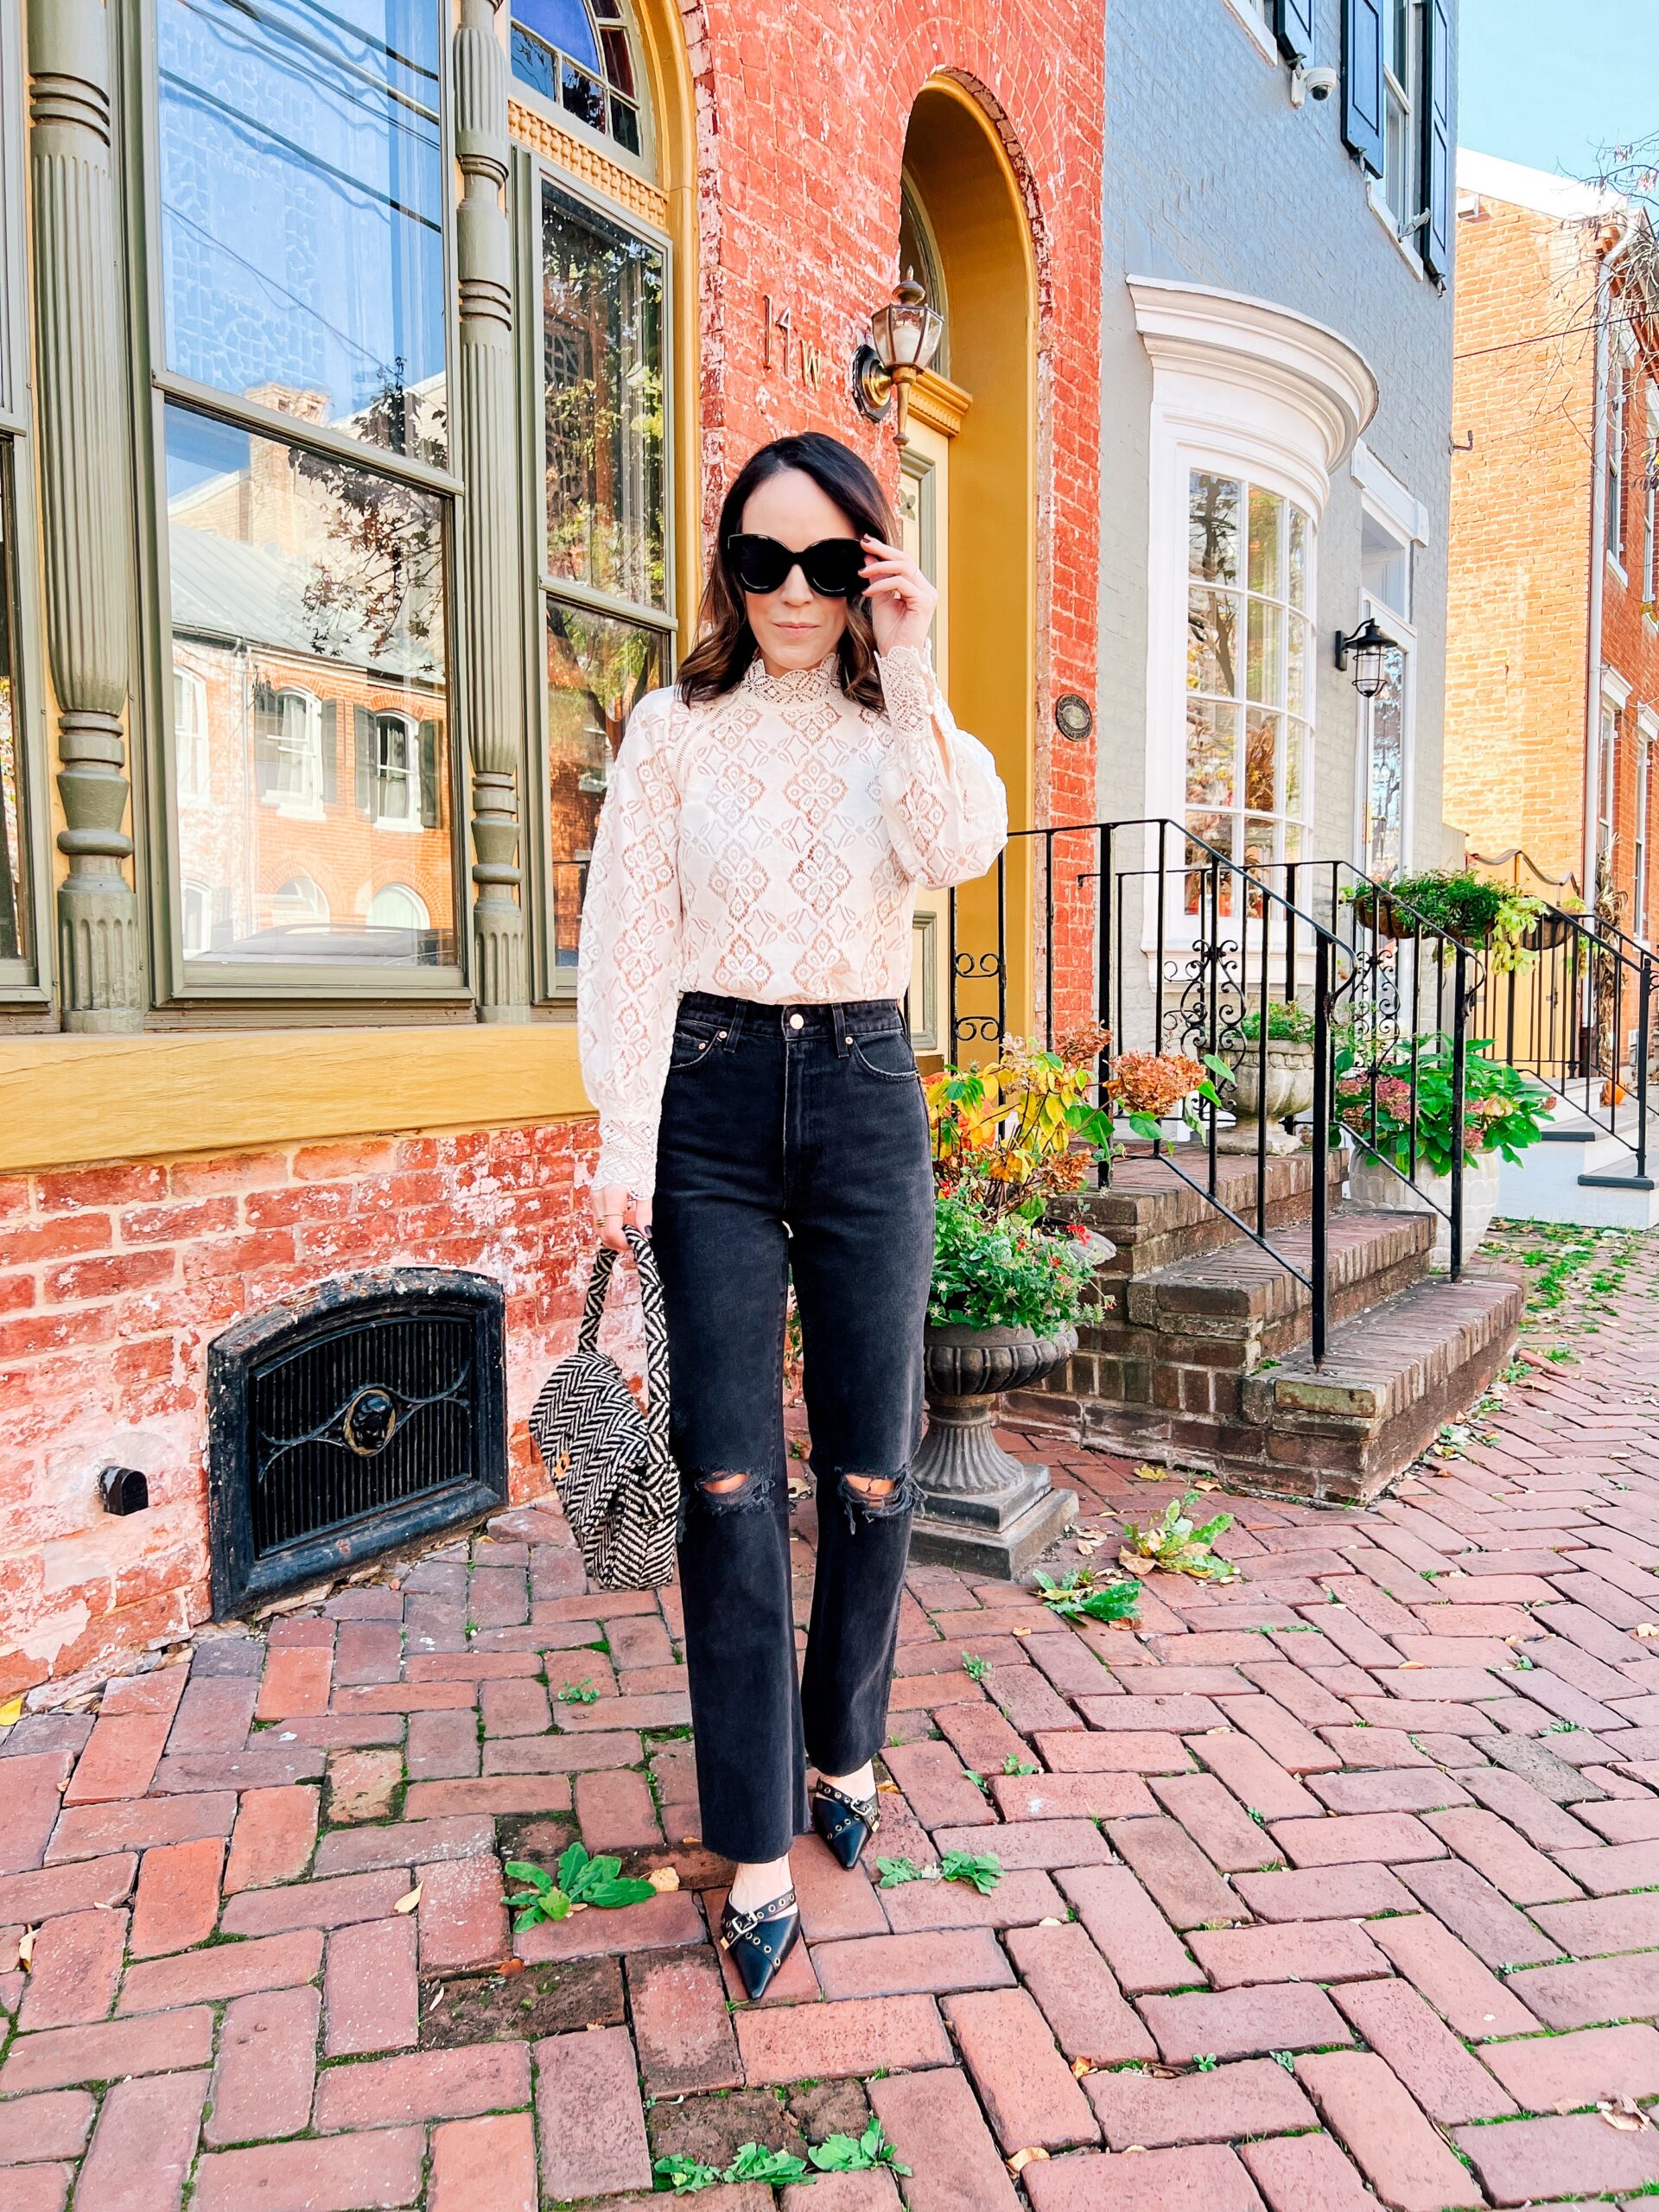 Lace Blouse and jeans